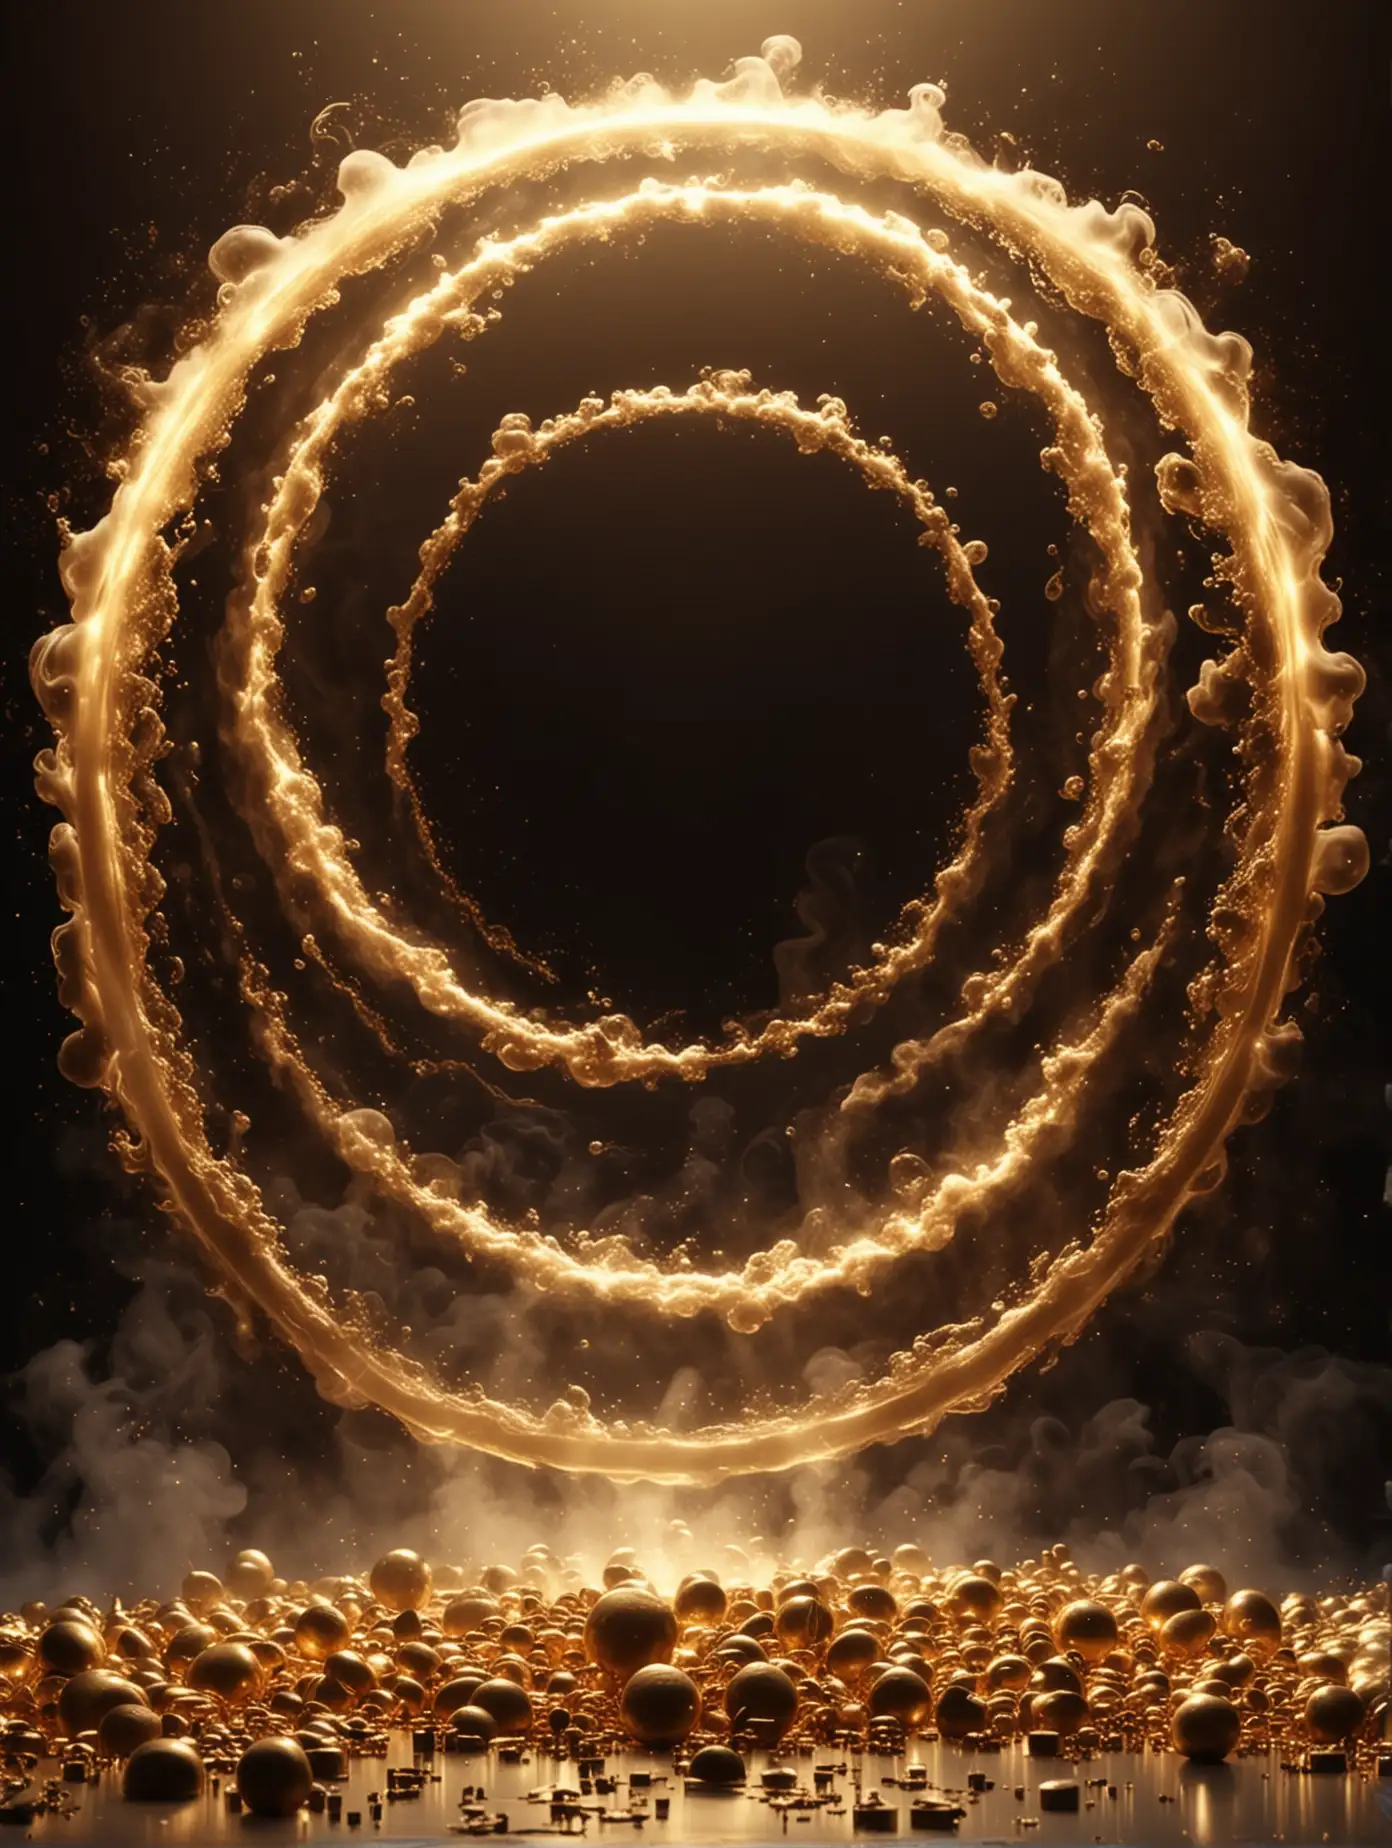 High Definition Golden Circles with Cinematic Lighting and Smoke Effects